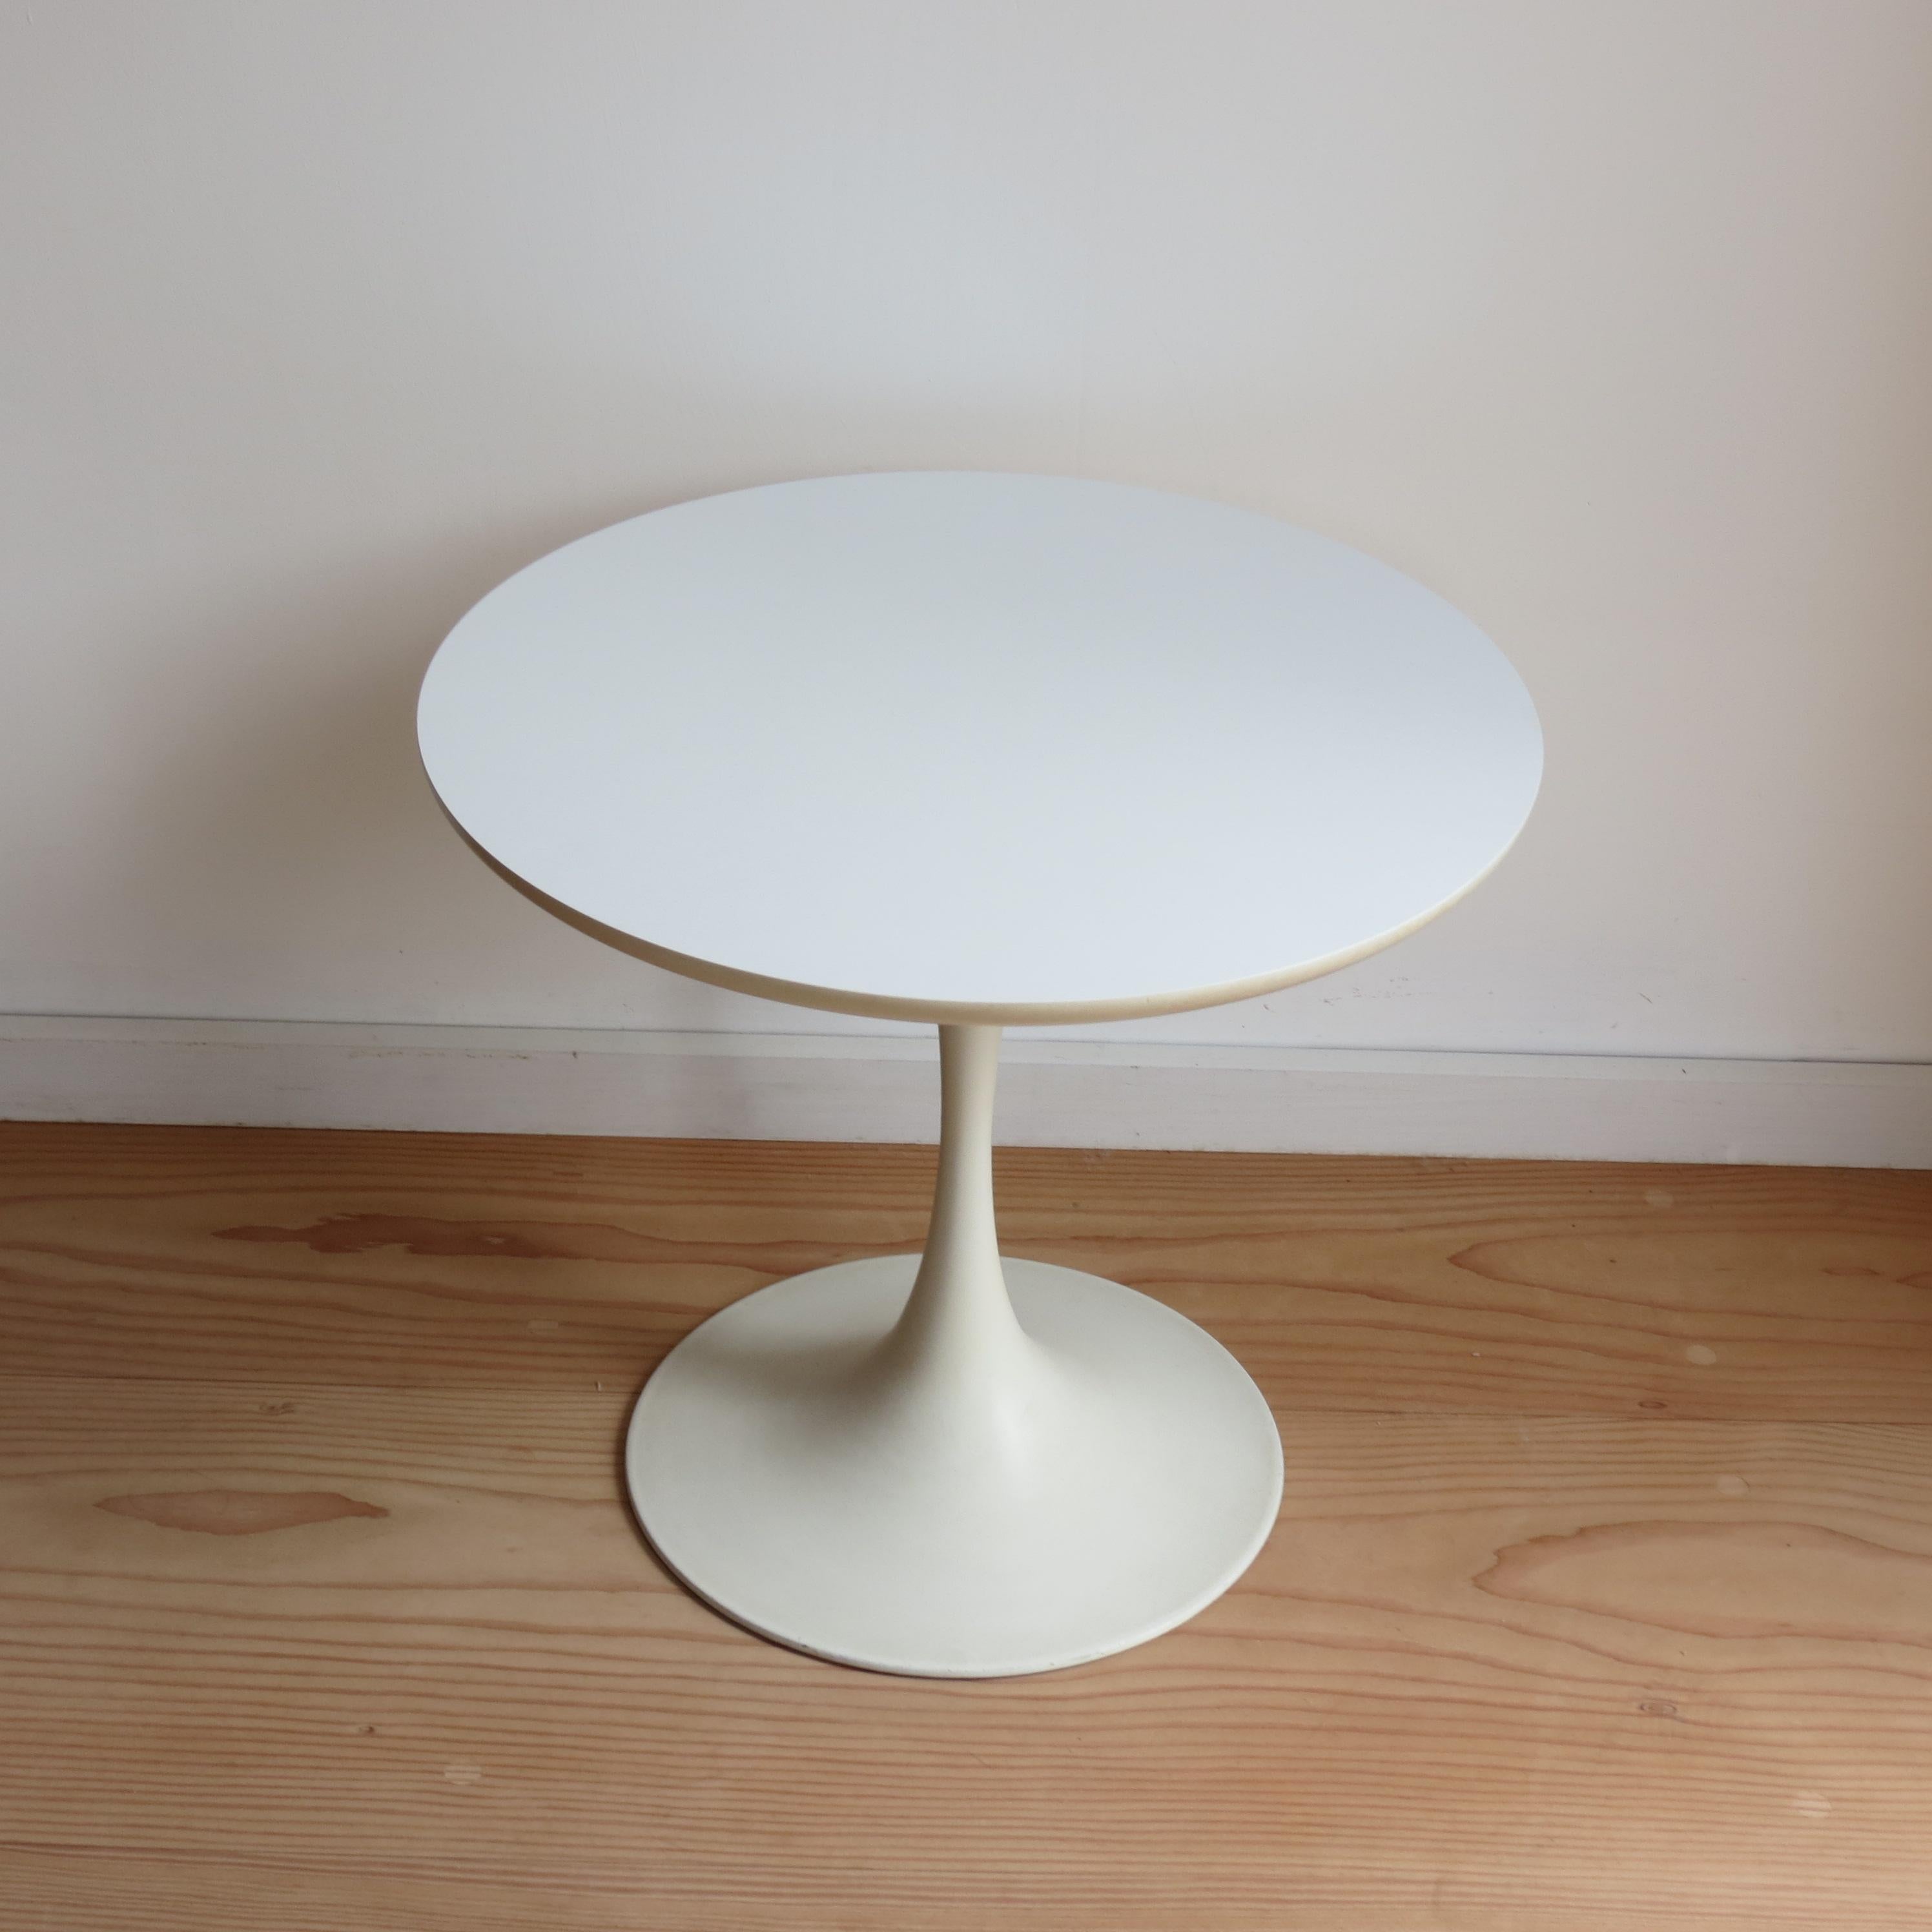 1960s white Tulip side table designed by Maurice Burke for Arkana, Bath, UK.

Cast aluminium base and circular laminate top.

In good overall vintage condition, minimal signs of wear


ST461.